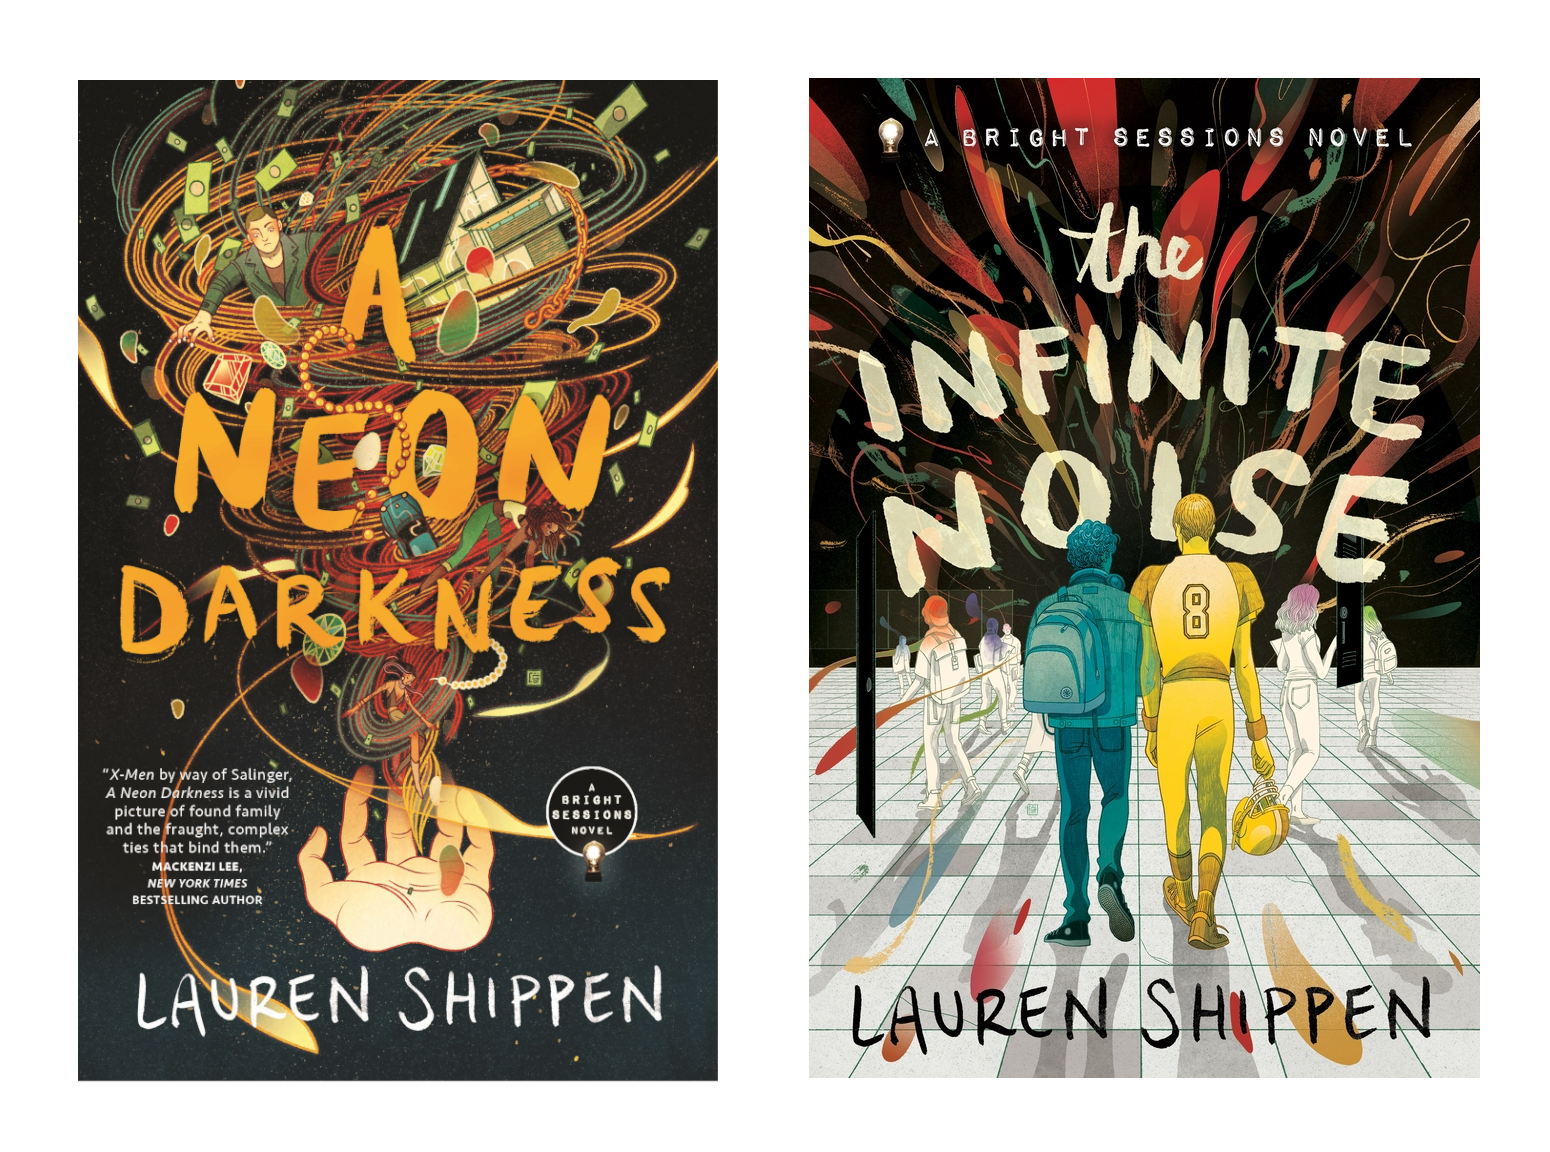 Two of Lauren Shippen's book covers for the Bright Sessions novels, "The Infinite Noise" and "A Neon Darkness". Infinite Noise features two characters, a football player (Caleb) in yellow and a young man with a backpack (Adam) in blue walking down a school hallway with other highs schoolers walking away from them, each in white with their own color around their head. The tile floor has some shadow shapes in colors, reflecting a ceiling of noisy colors against black in streams, ribbons, and round shapes. A Neon Darkness has a black, faintly starry background, with a floating hand in at the bottom. The hand is open, palm up, releasing a tornado of color. Within the tornado is a young man and a house, wrapped in a chain, as well as pearls, a car, jewels, money, and two femme characters near the bottom.